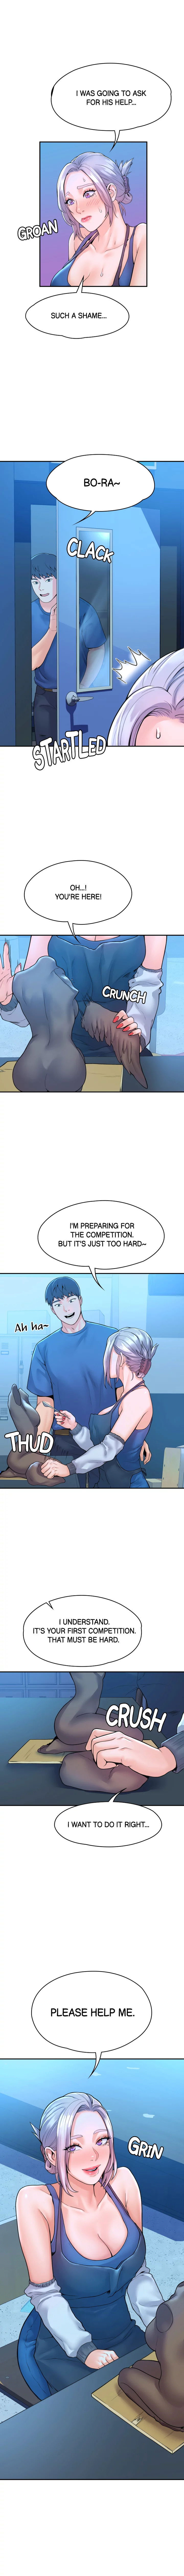 campus-today-chap-40-10